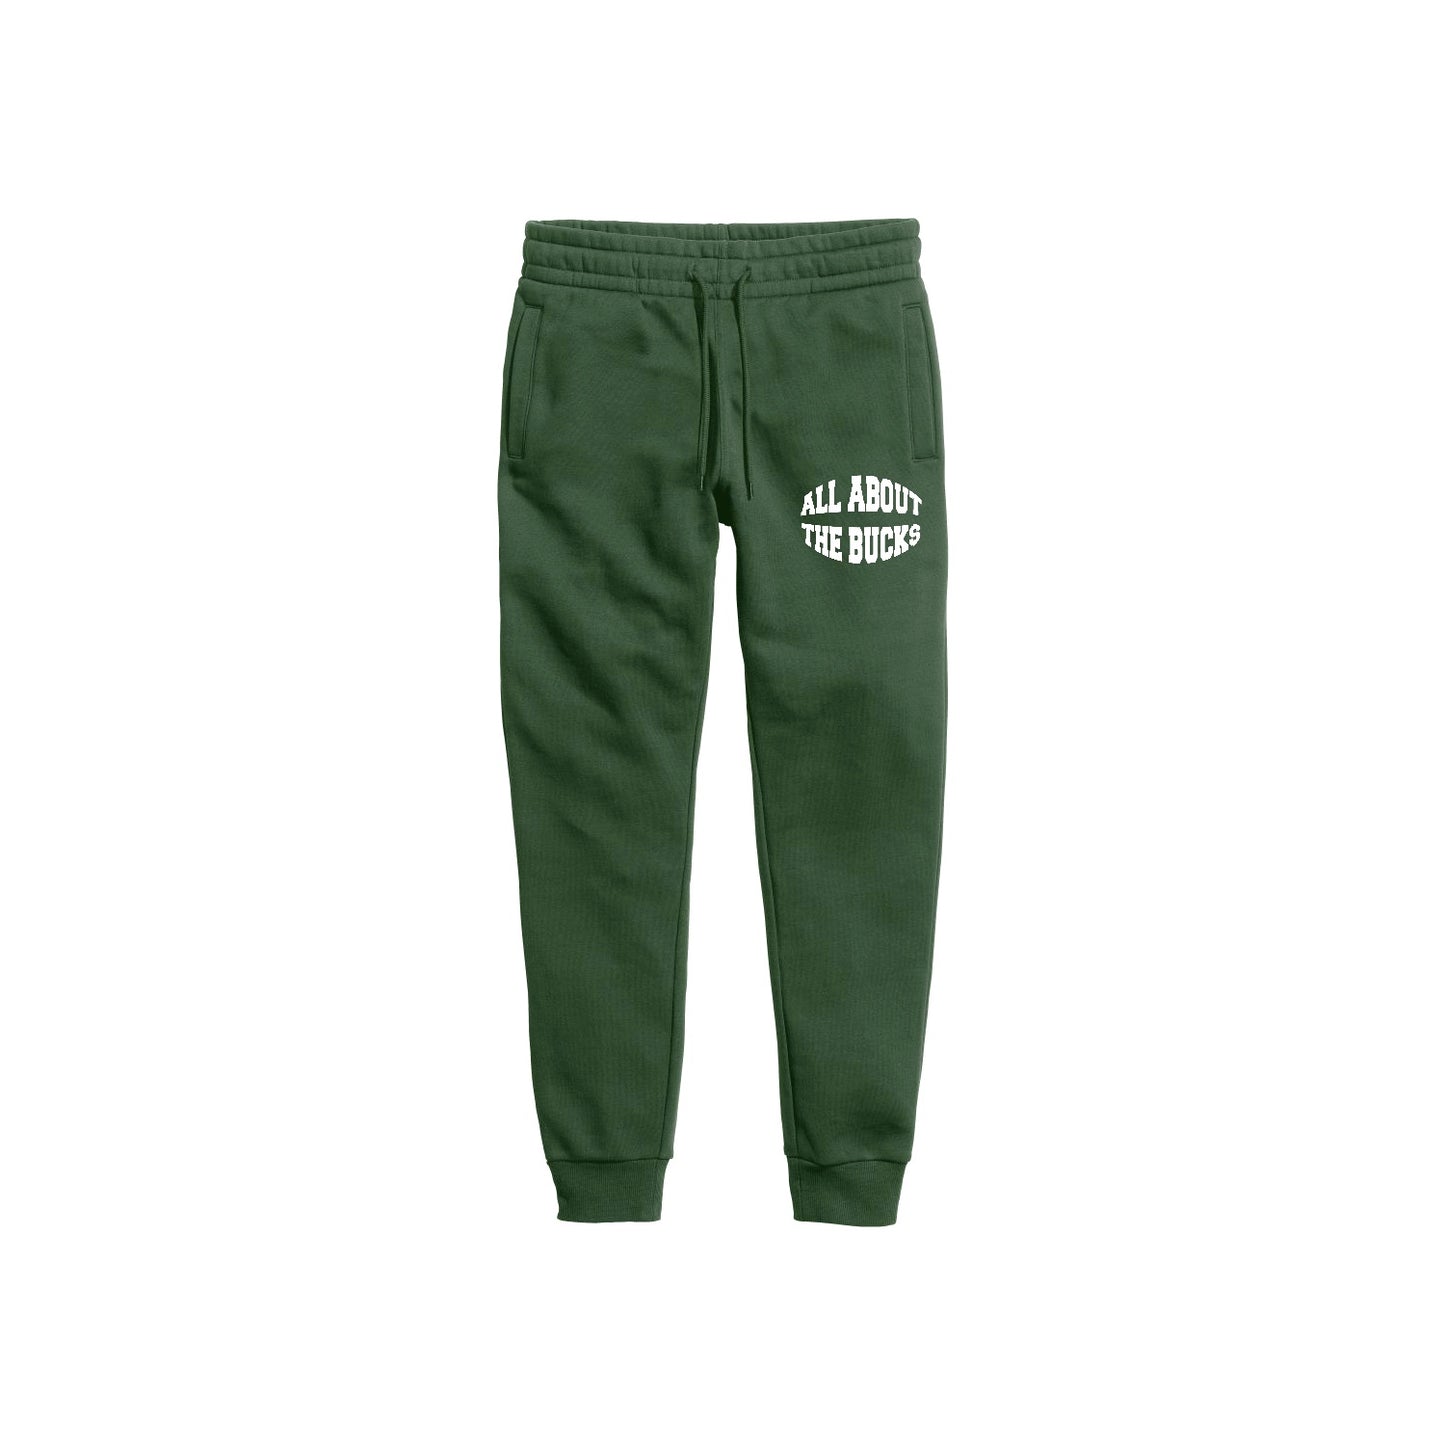 AllAboutTheBuck$ Olive Green Joggers